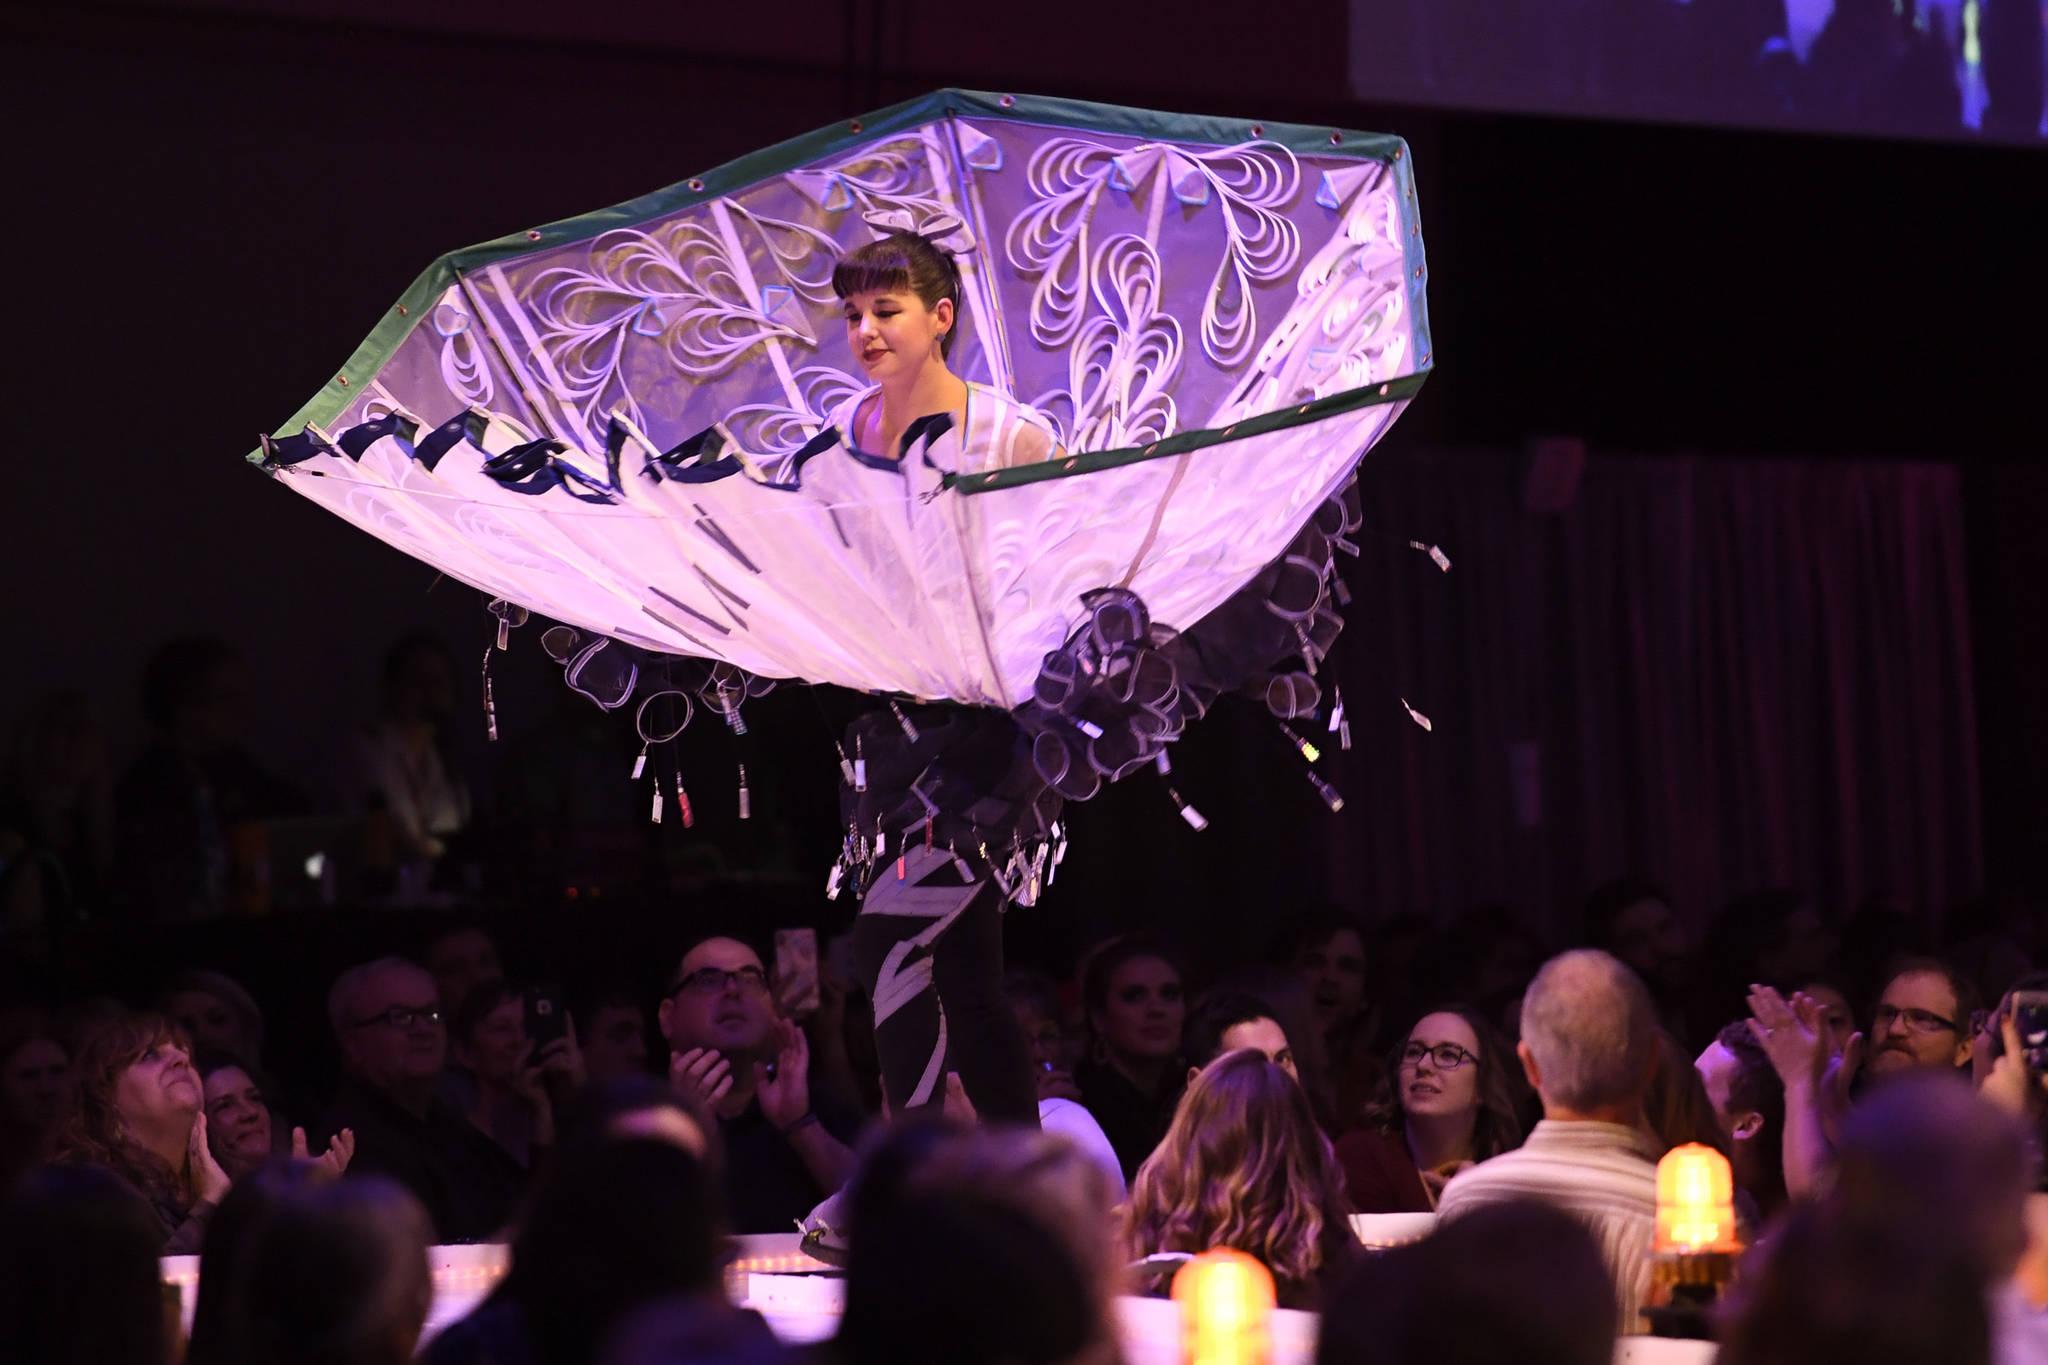 Michelle Morris models her “Flipping Out” at the Wearable Art show at Centennial Hall on Saturday, Feb. 16, 2019. (Michael Penn | Capital City Weekly)